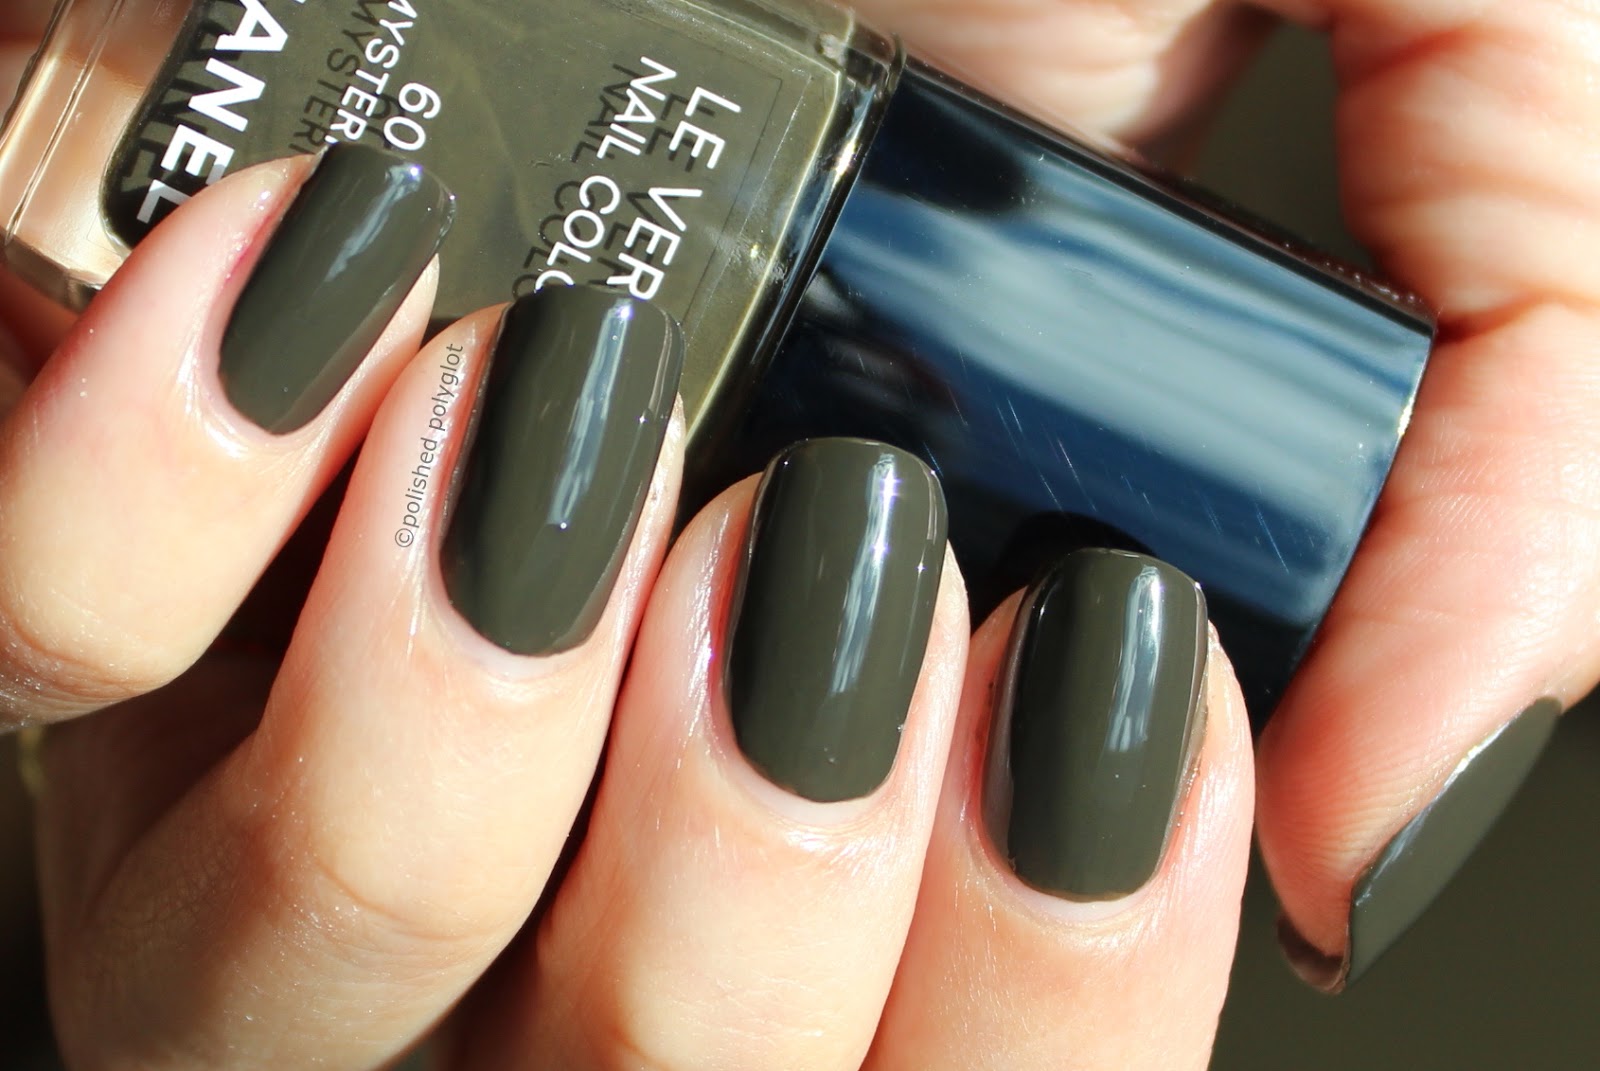 NOTD: Chanel Le Vernis 601 Mysterious Welcome to Fall! / Polished